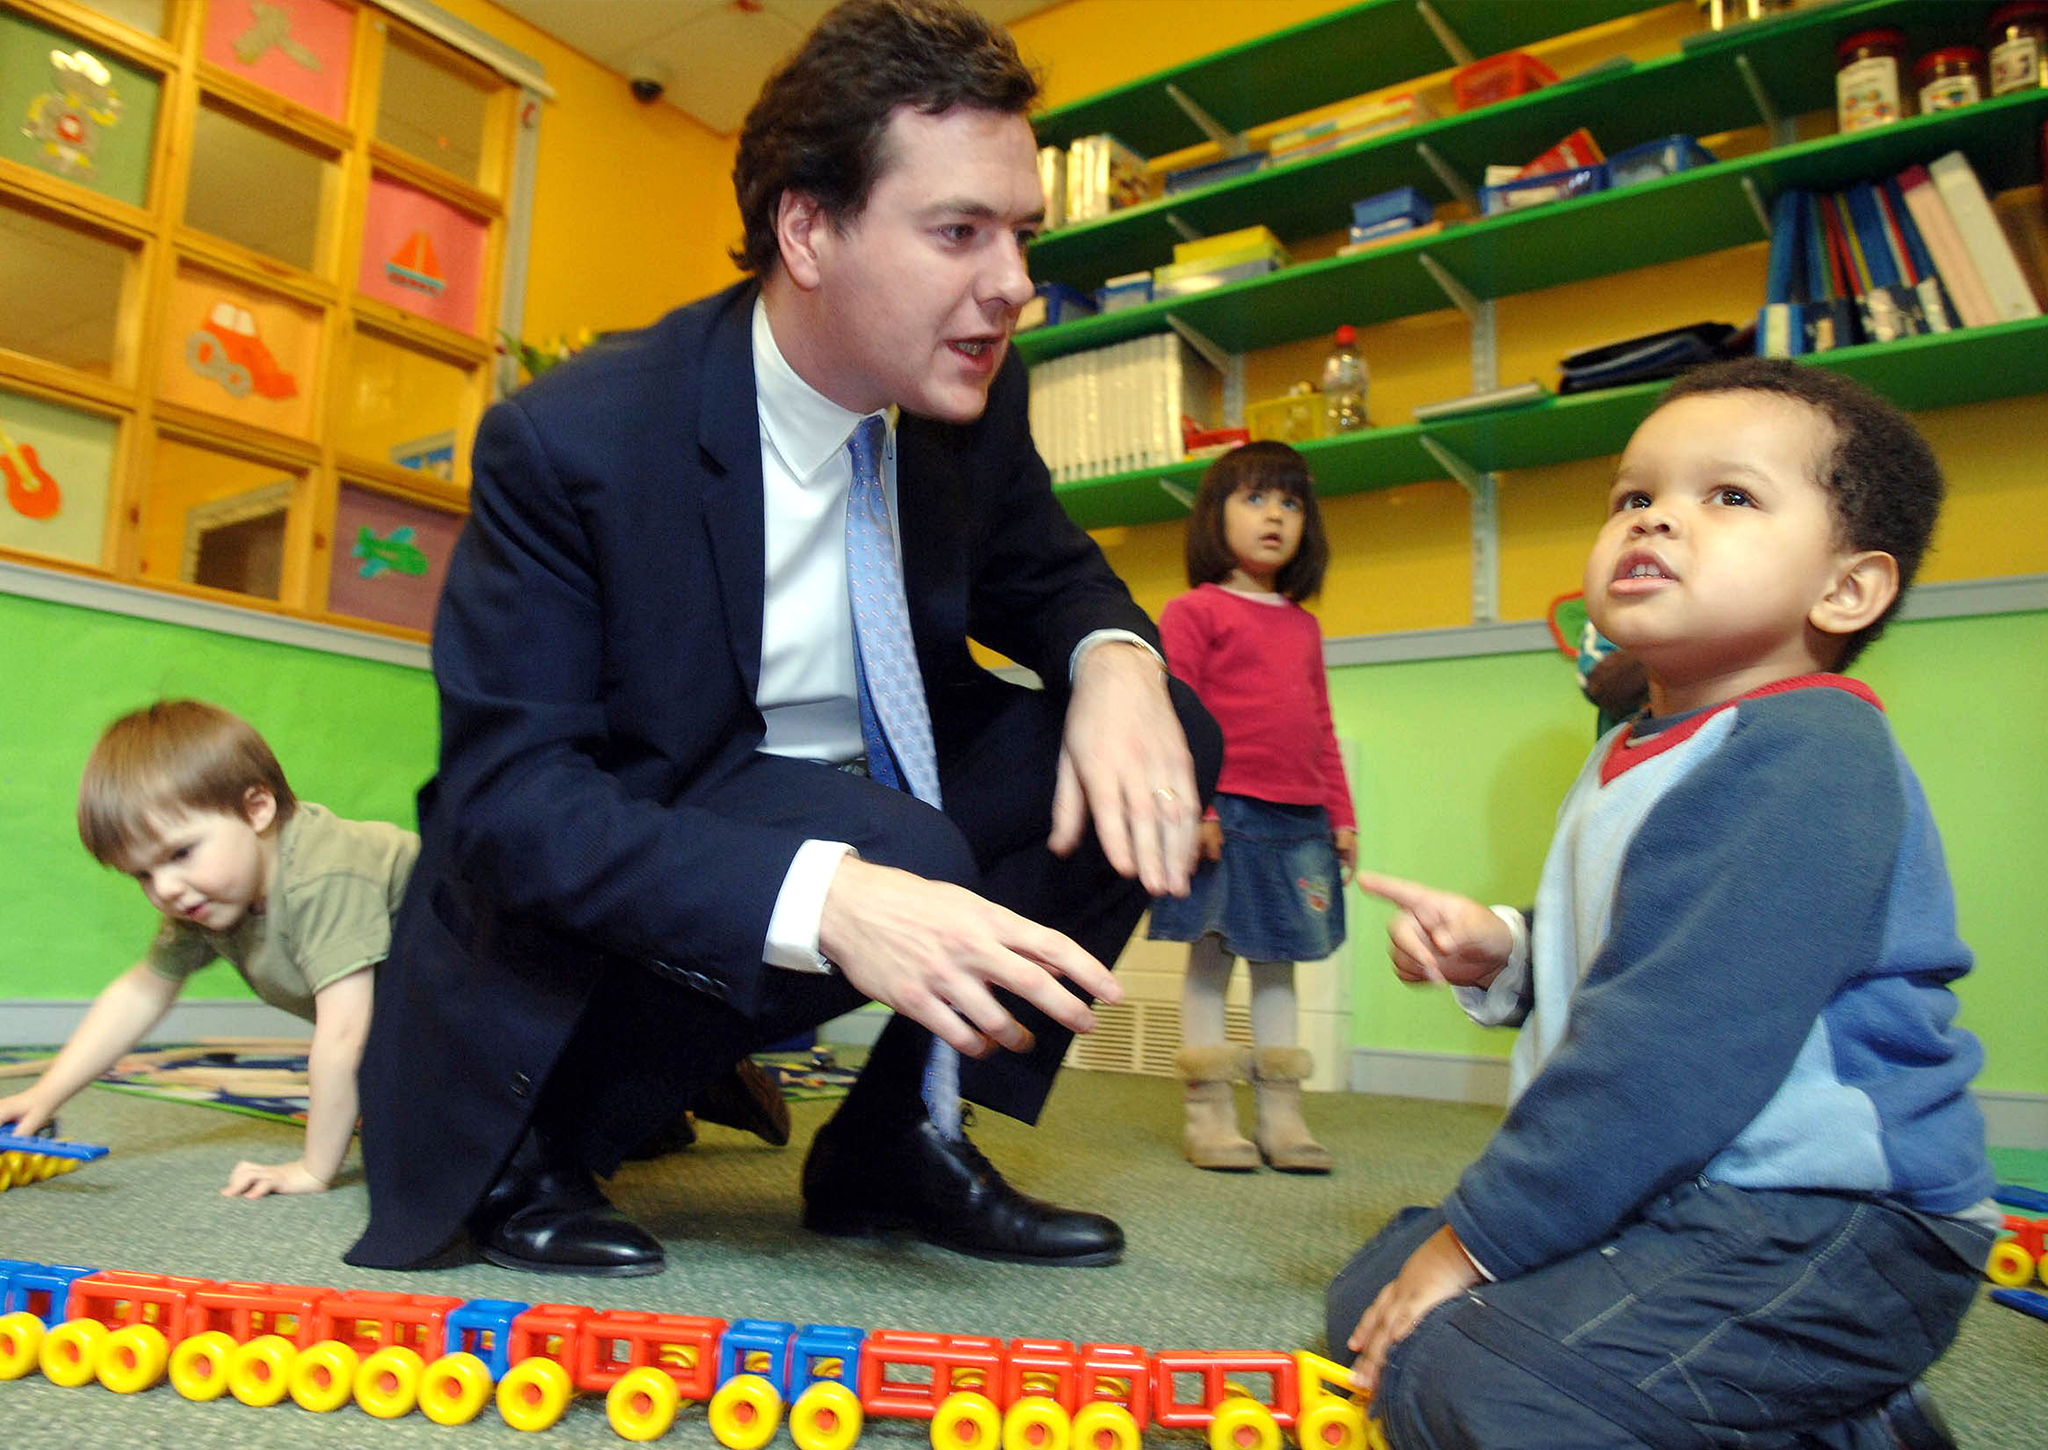 "And in the boldly progressive move of removing child tax credits to third and subsequent children, the Chancellor has shown conclusively that children are NOT the future"